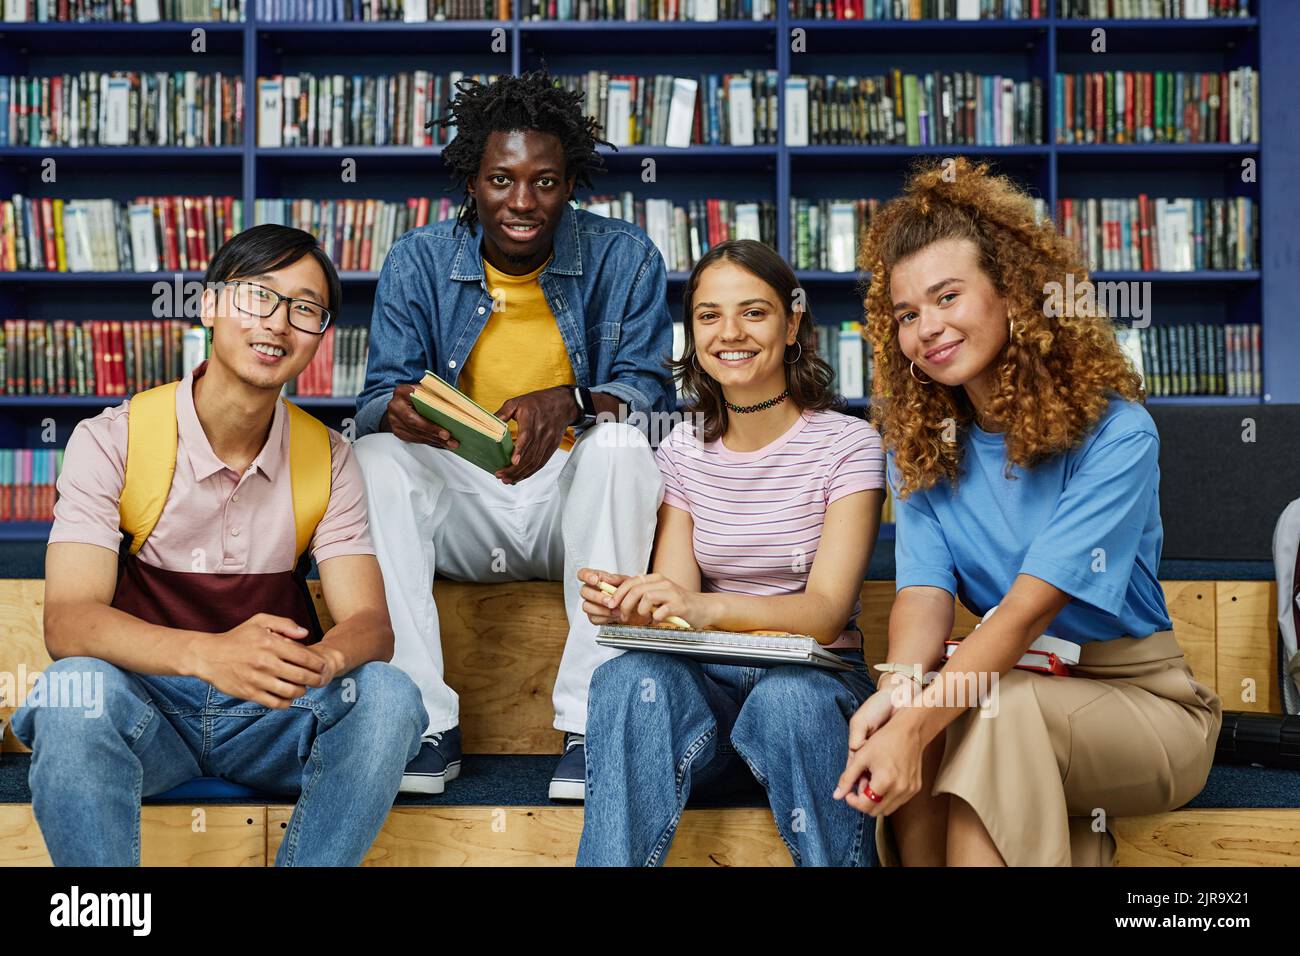 Front view at diverse group of students in library smiling happily at camera against bookshelves Stock Photo